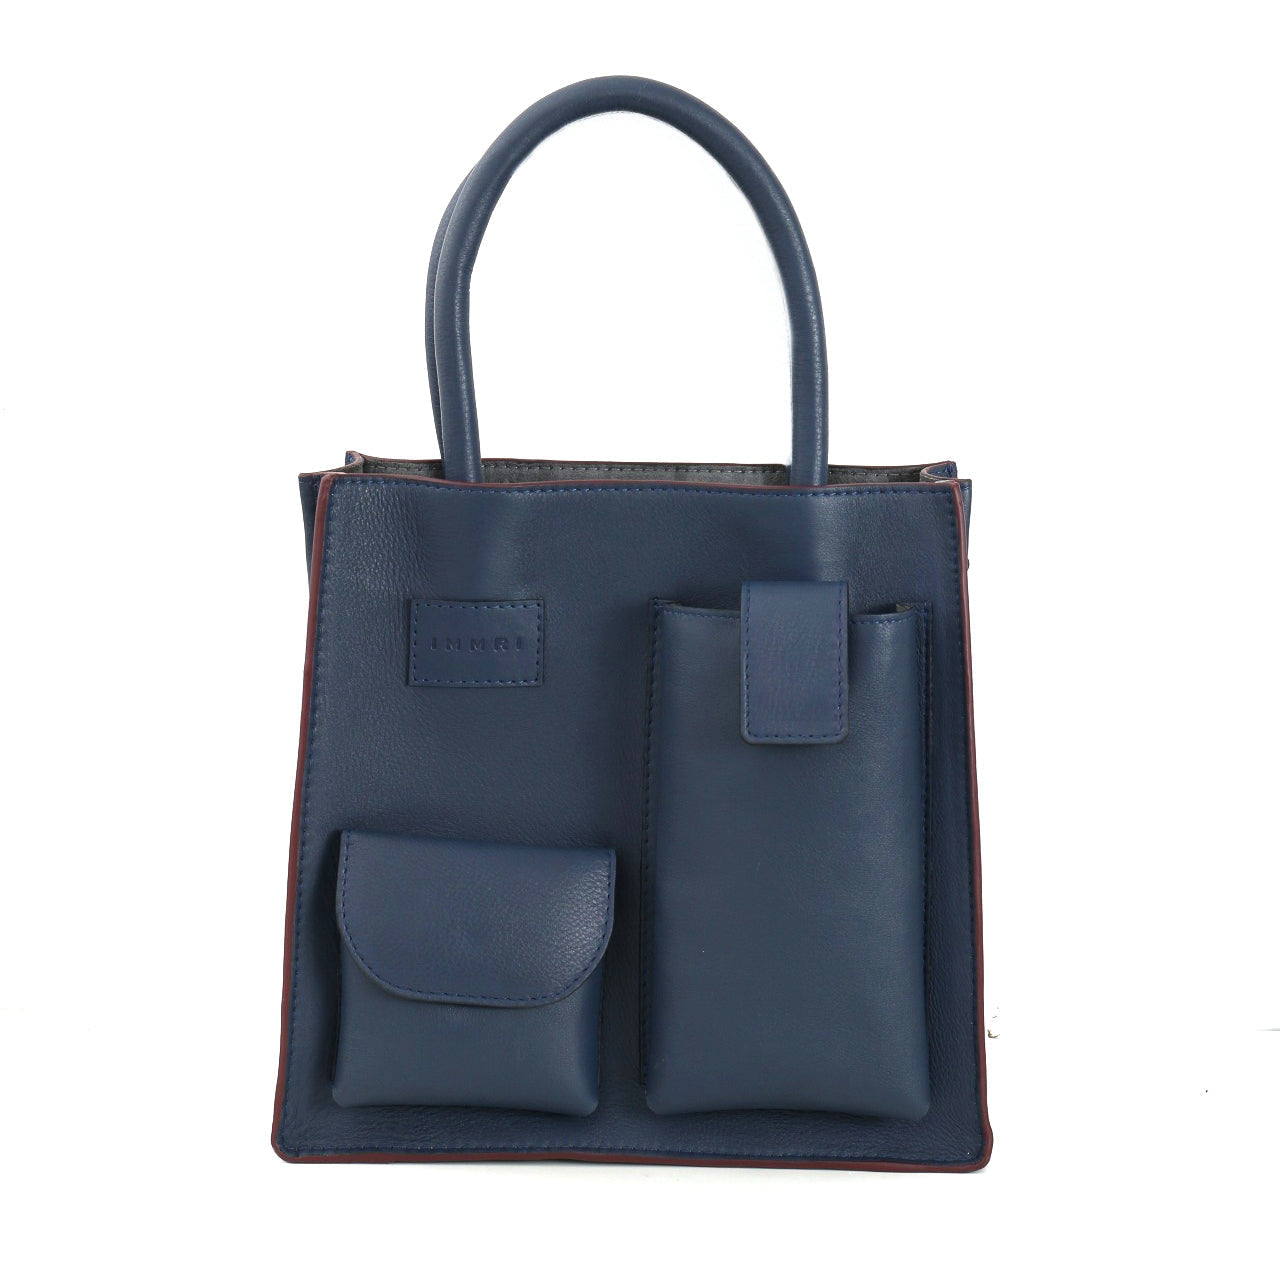 Workation Travel Tote Bag - Blue